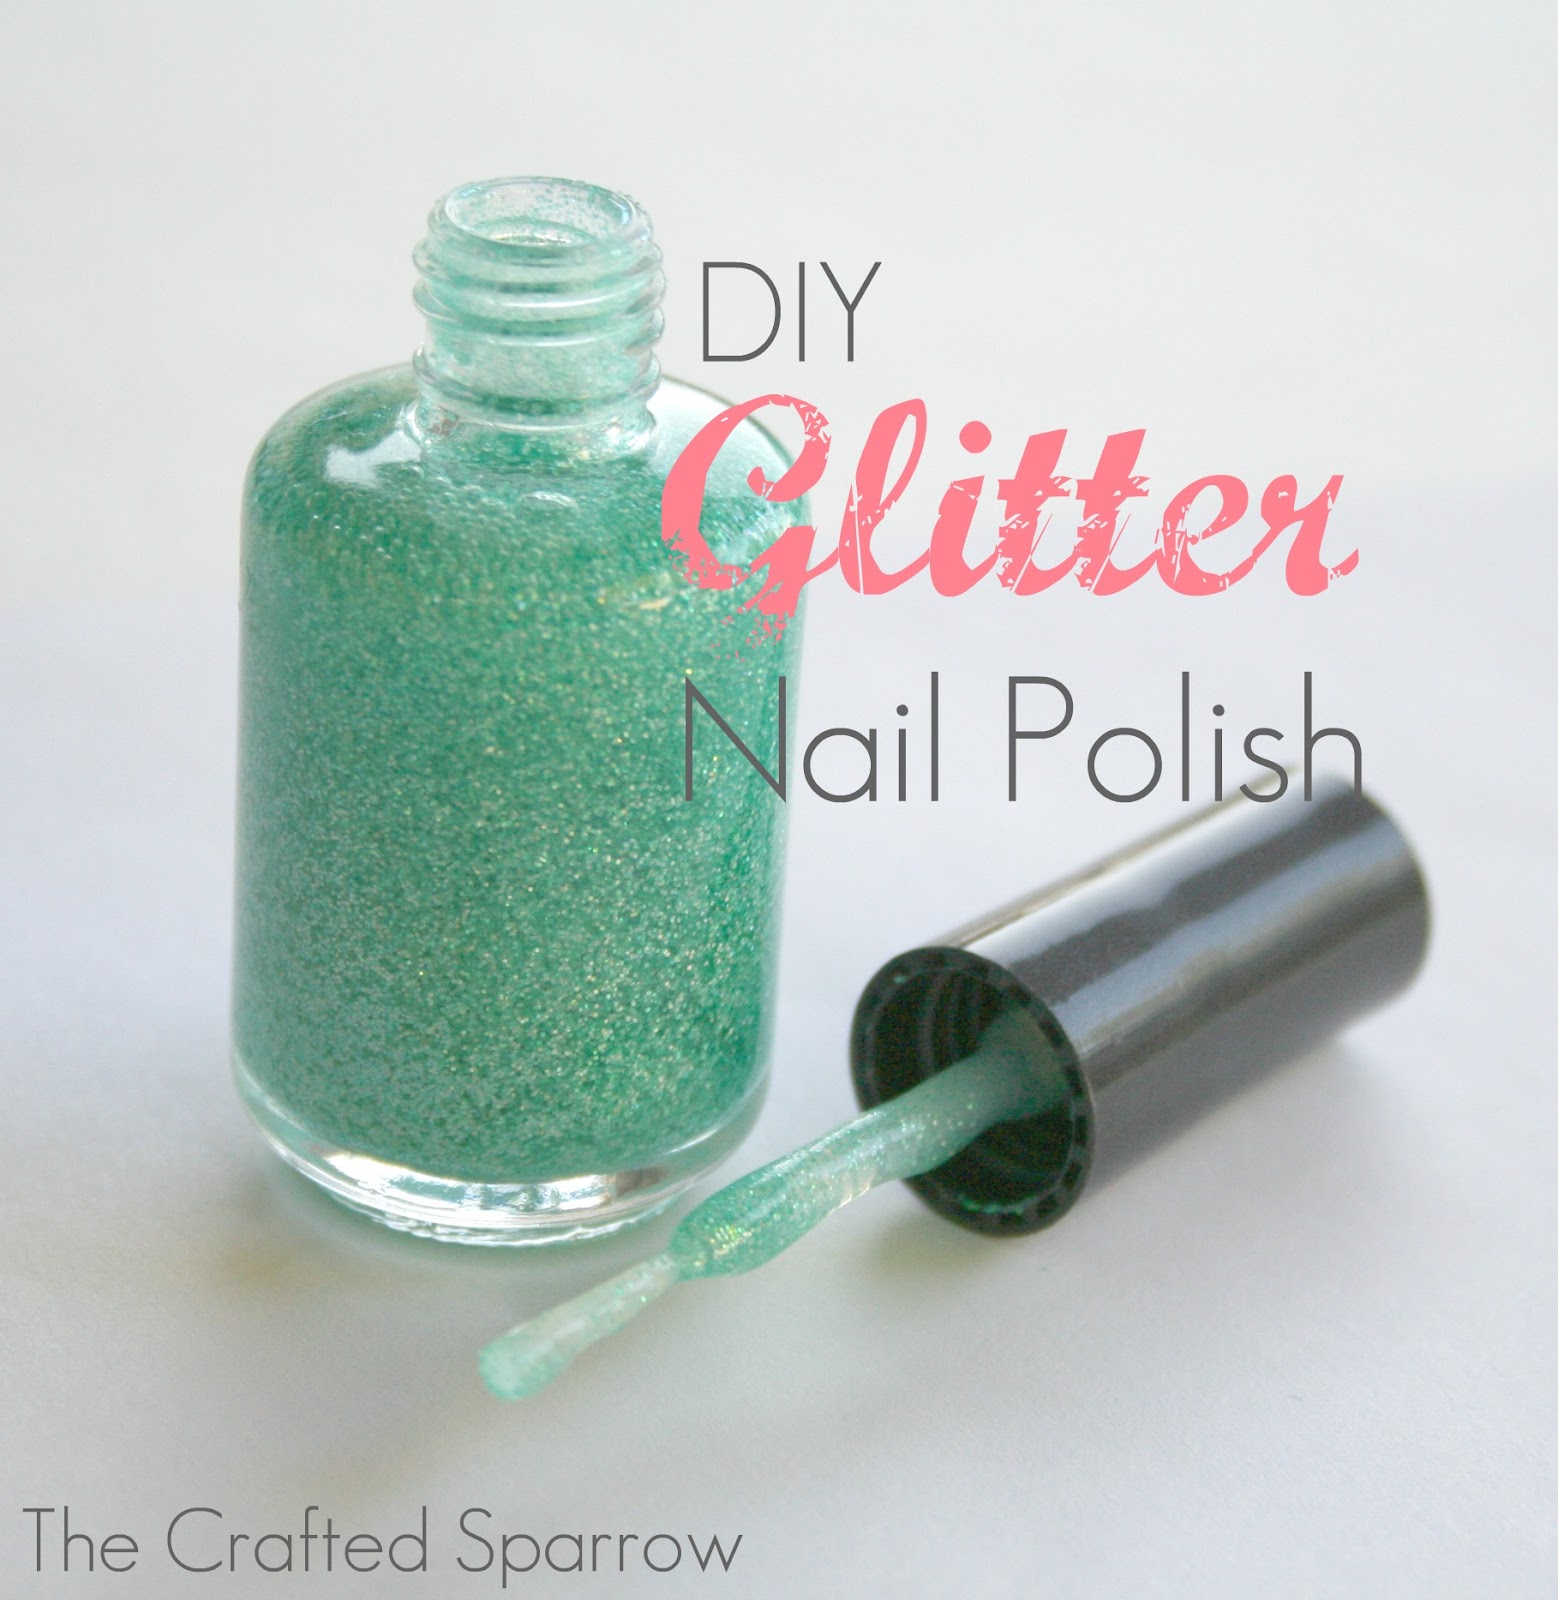 Do you love glitter nail polish as much as I do!?! I love sparkly nails,